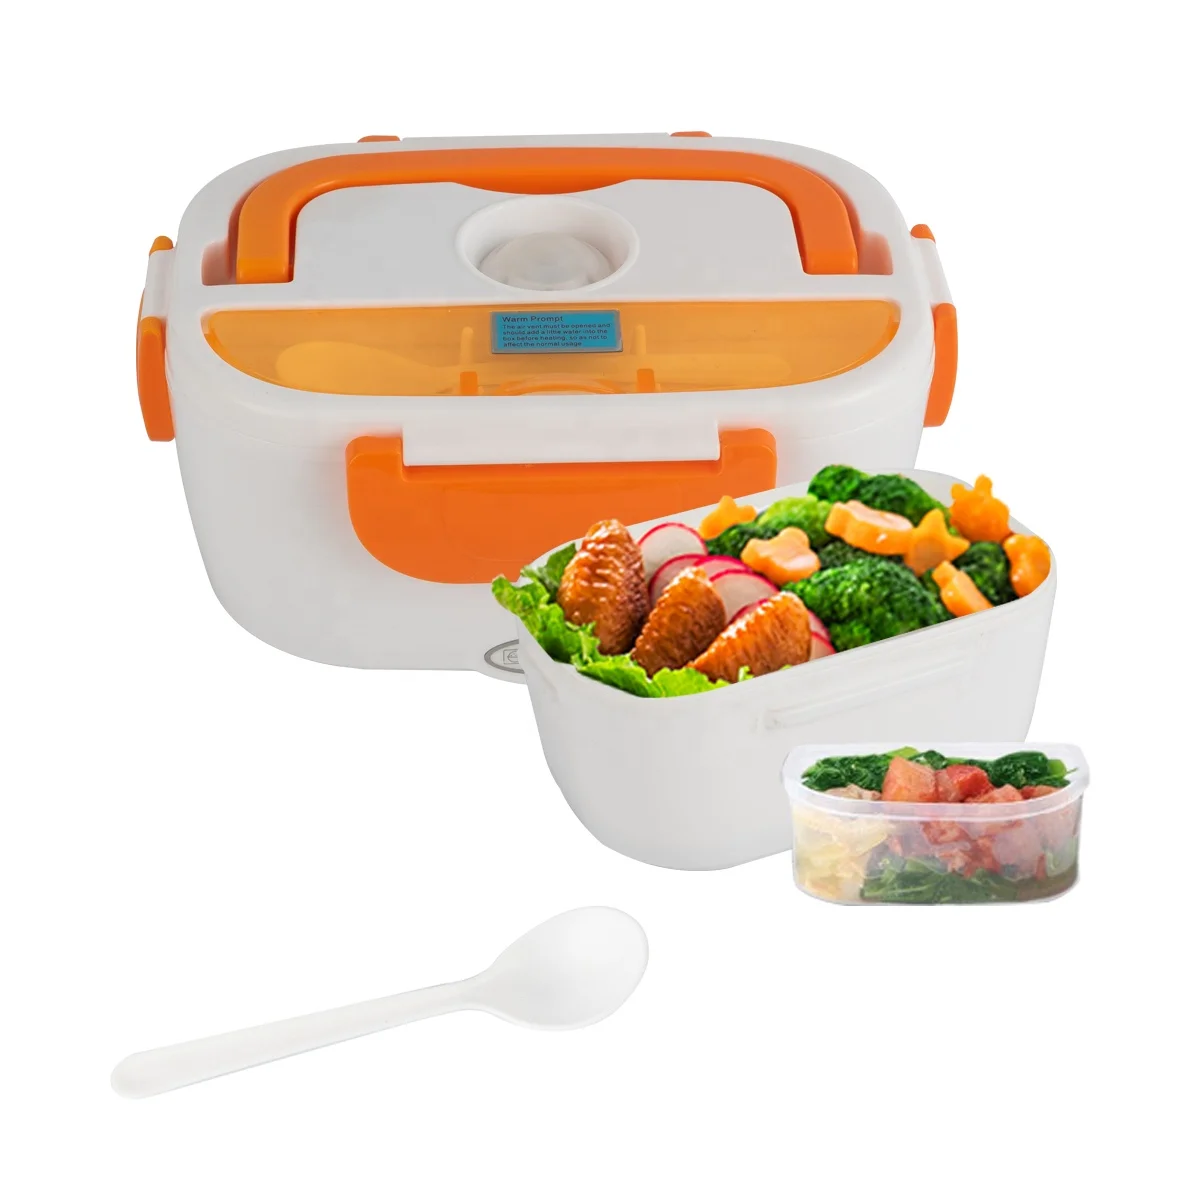 USB Portable Food Warmer Electric Lunch Box Food Heater Lunch